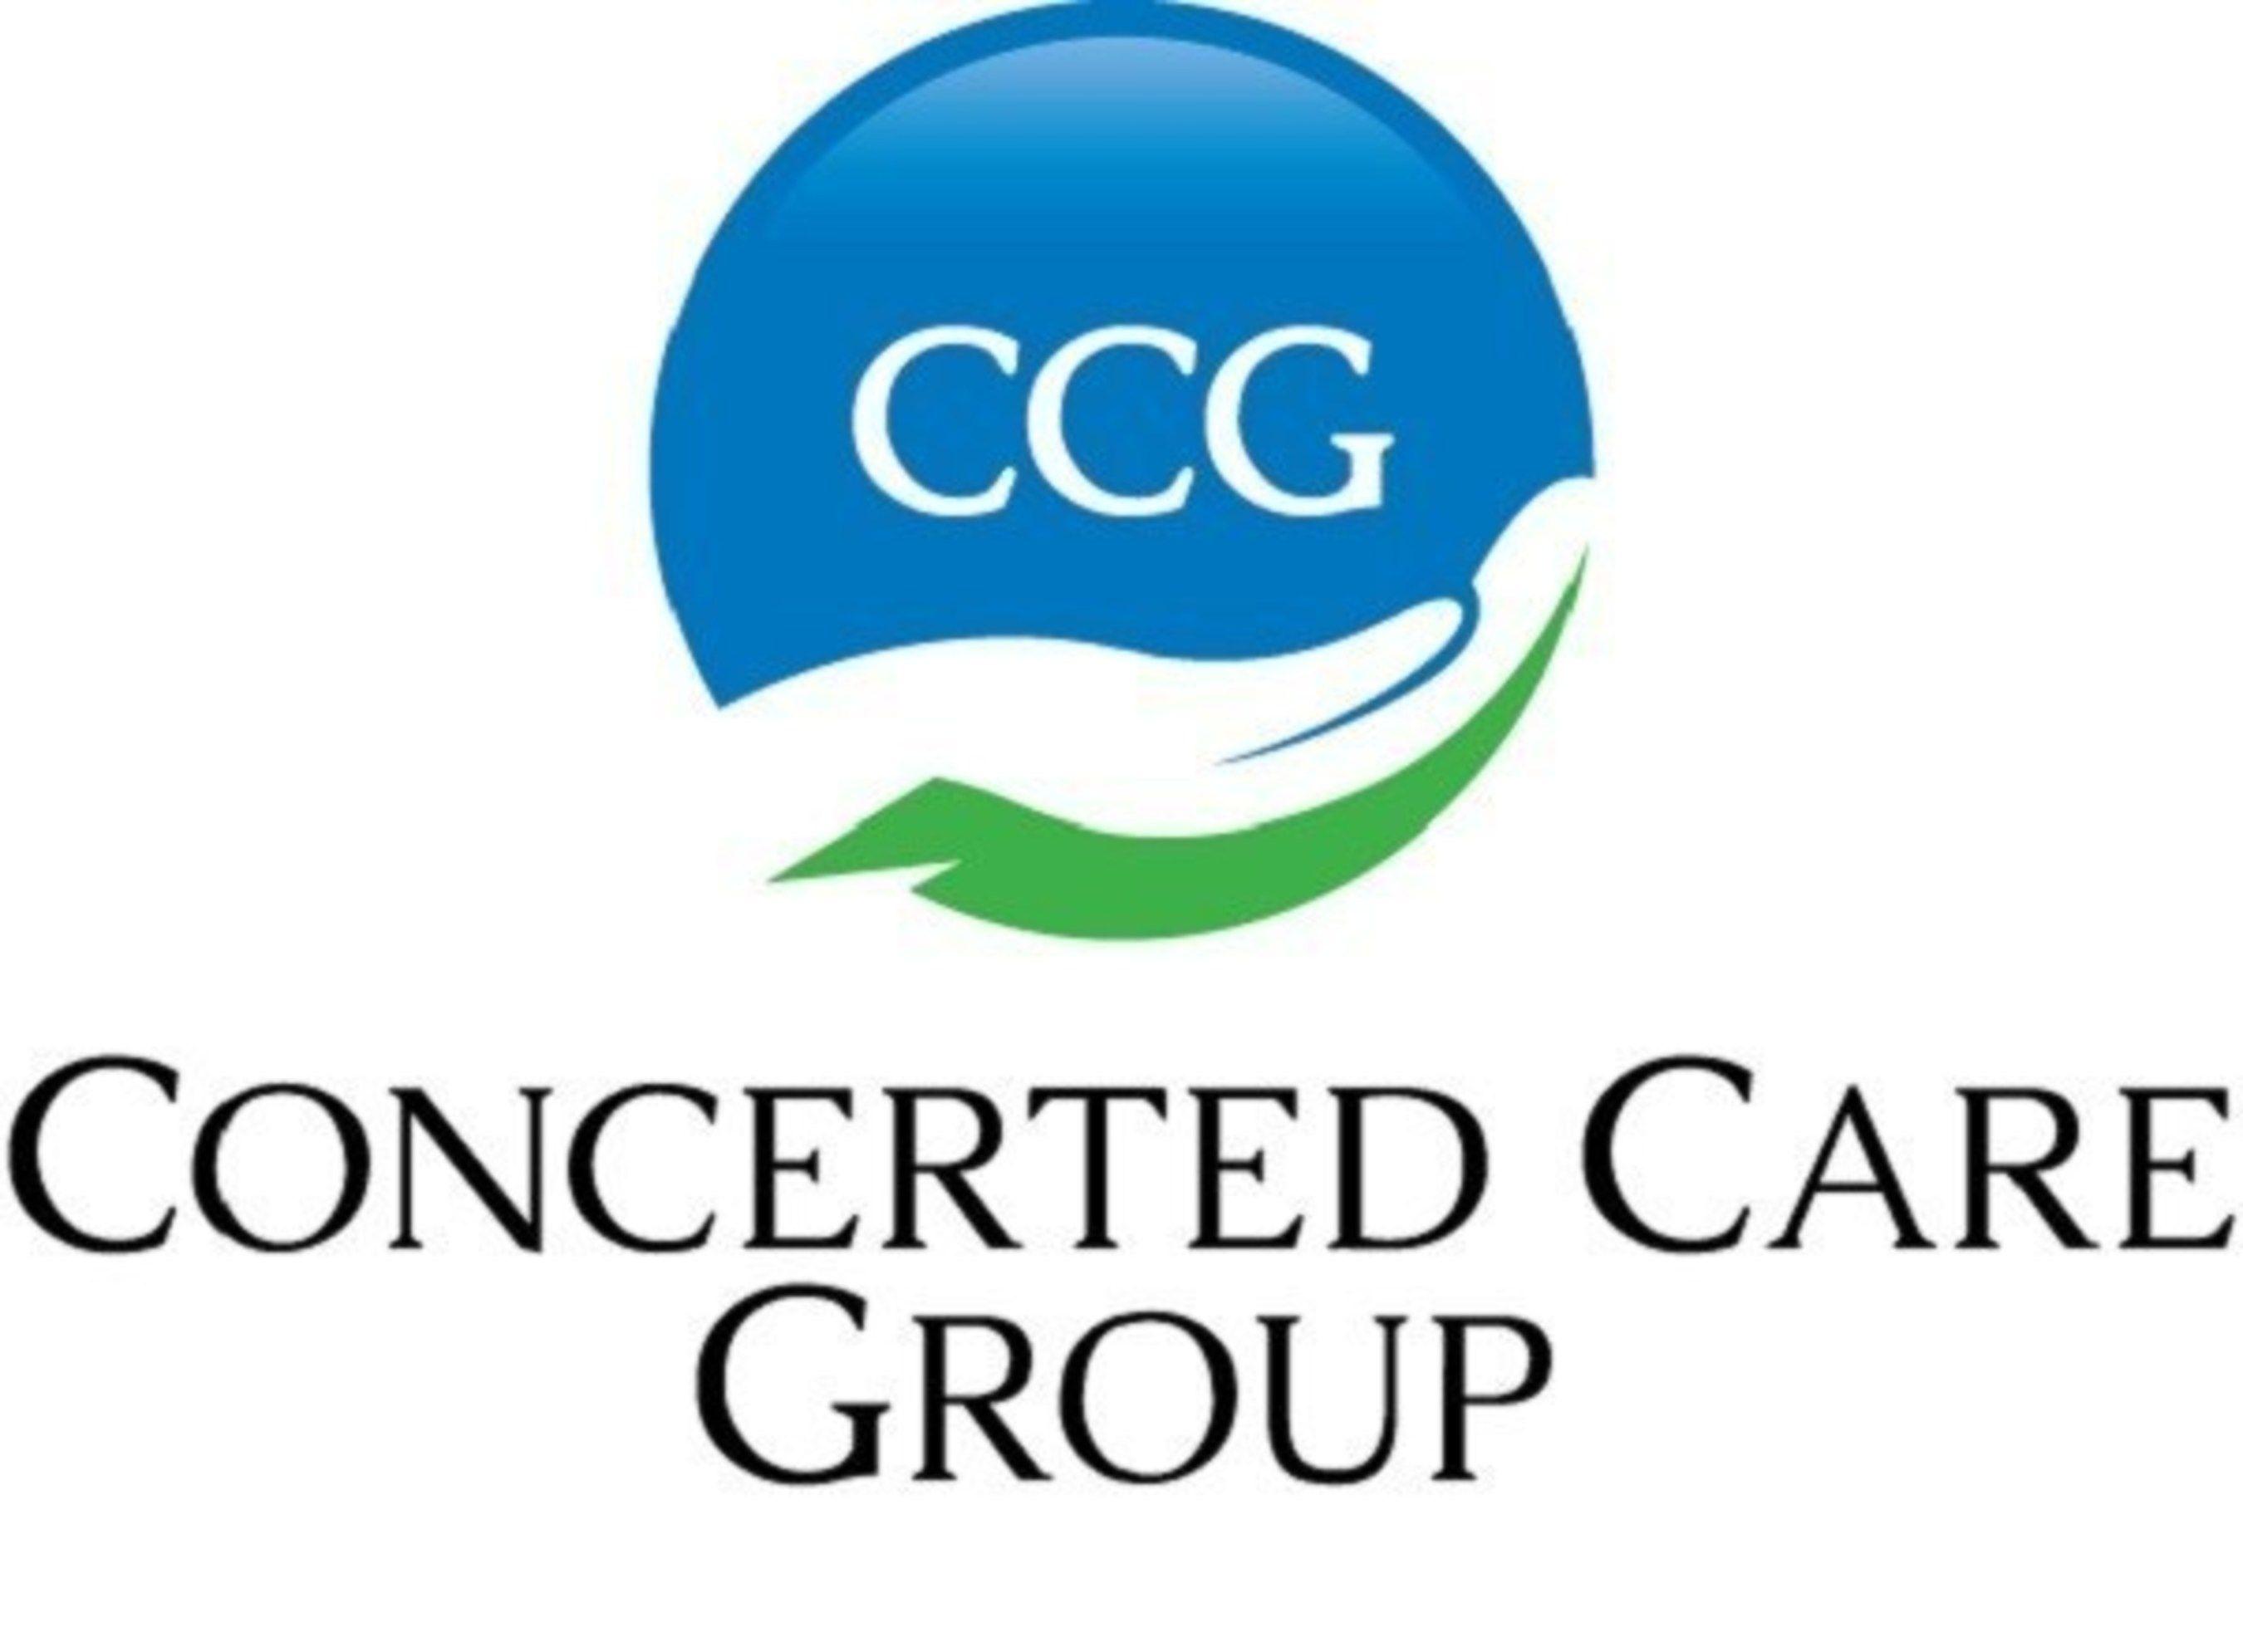 CARF Logo - Concerted Care Group Awarded Three-Year CARF Accreditation